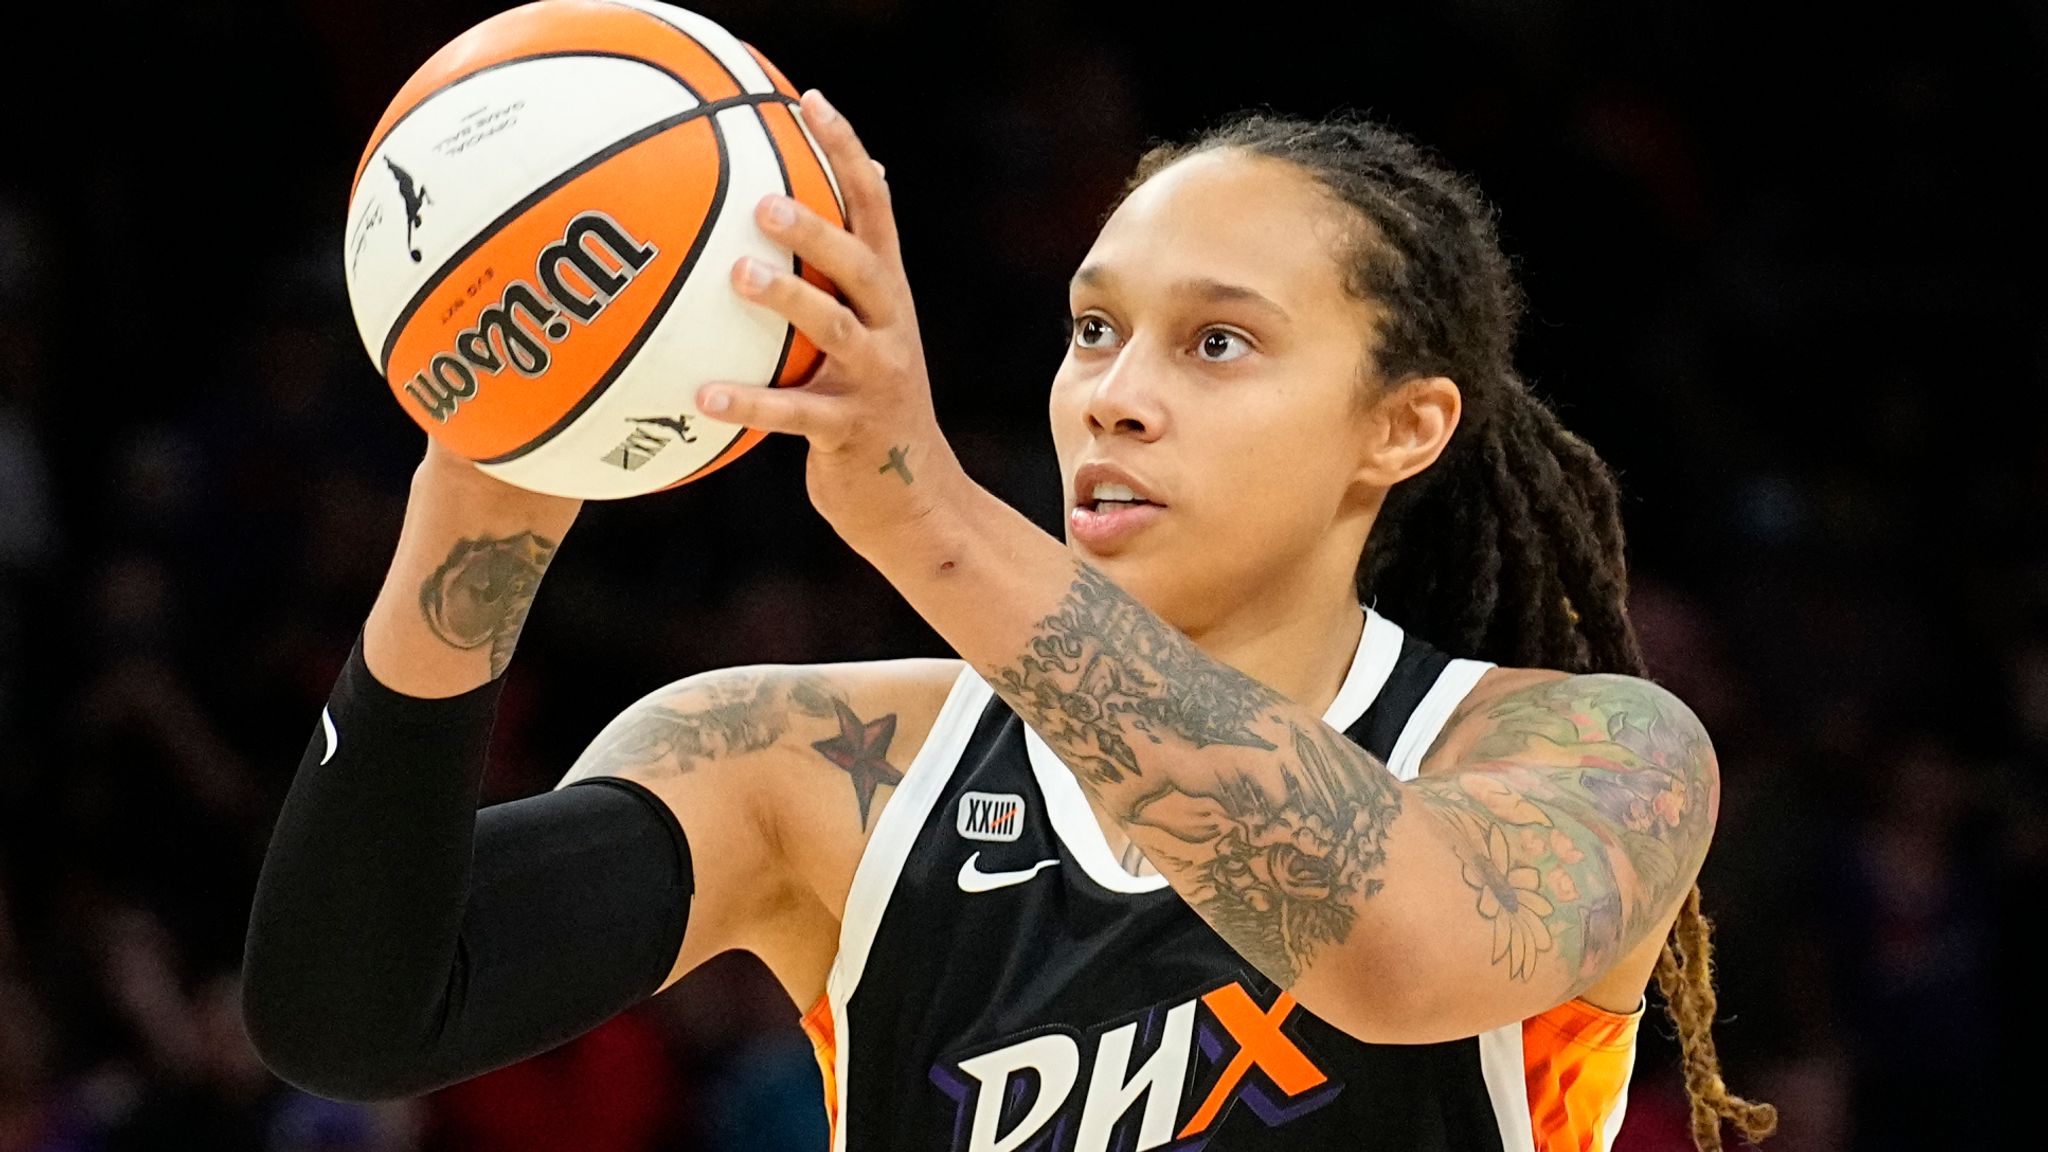 Wnba Star Brittney Griner Goes On Trial In Russia On Drugs Charges Four Months After Arrest Nba News Sky Sports